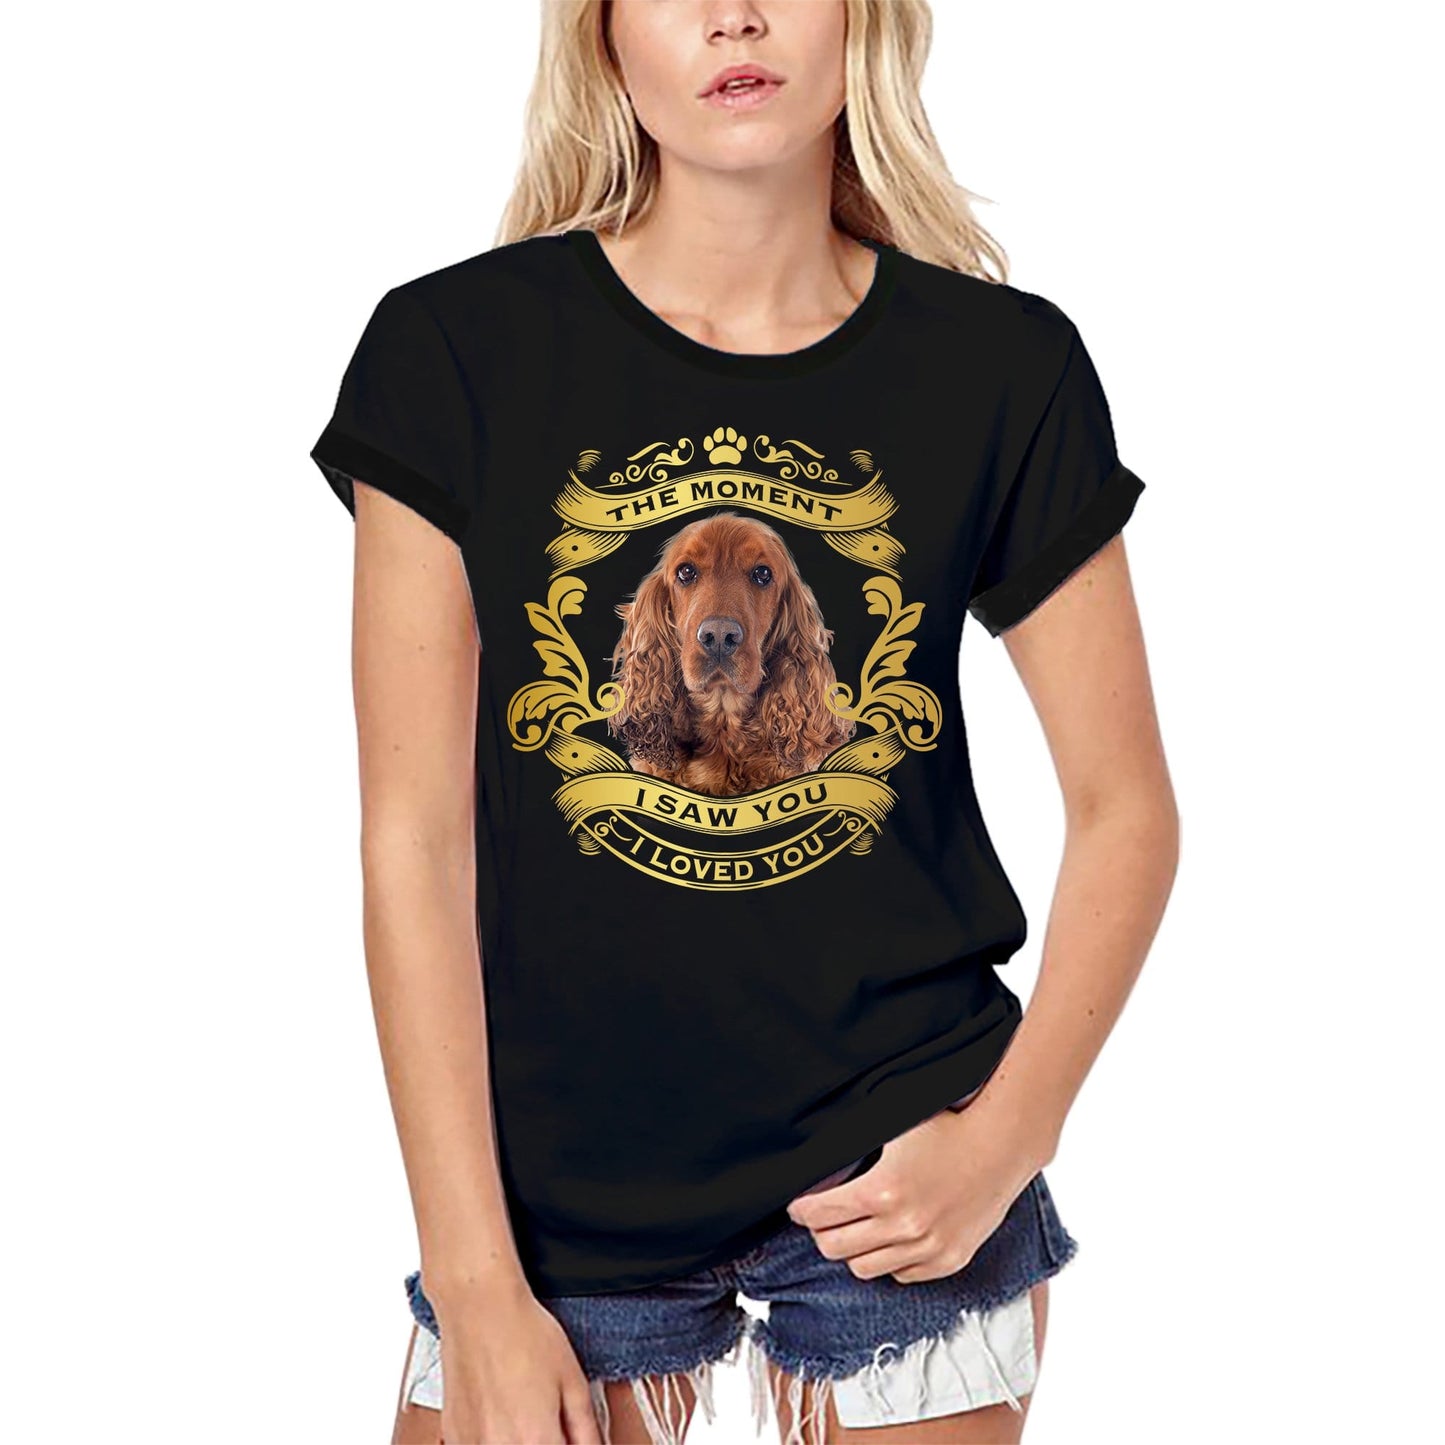 ULTRABASIC Women's Organic T-Shirt Cocker Spaniel Dog - Moment I Saw You I Loved You Puppy Tee Shirt for Ladies